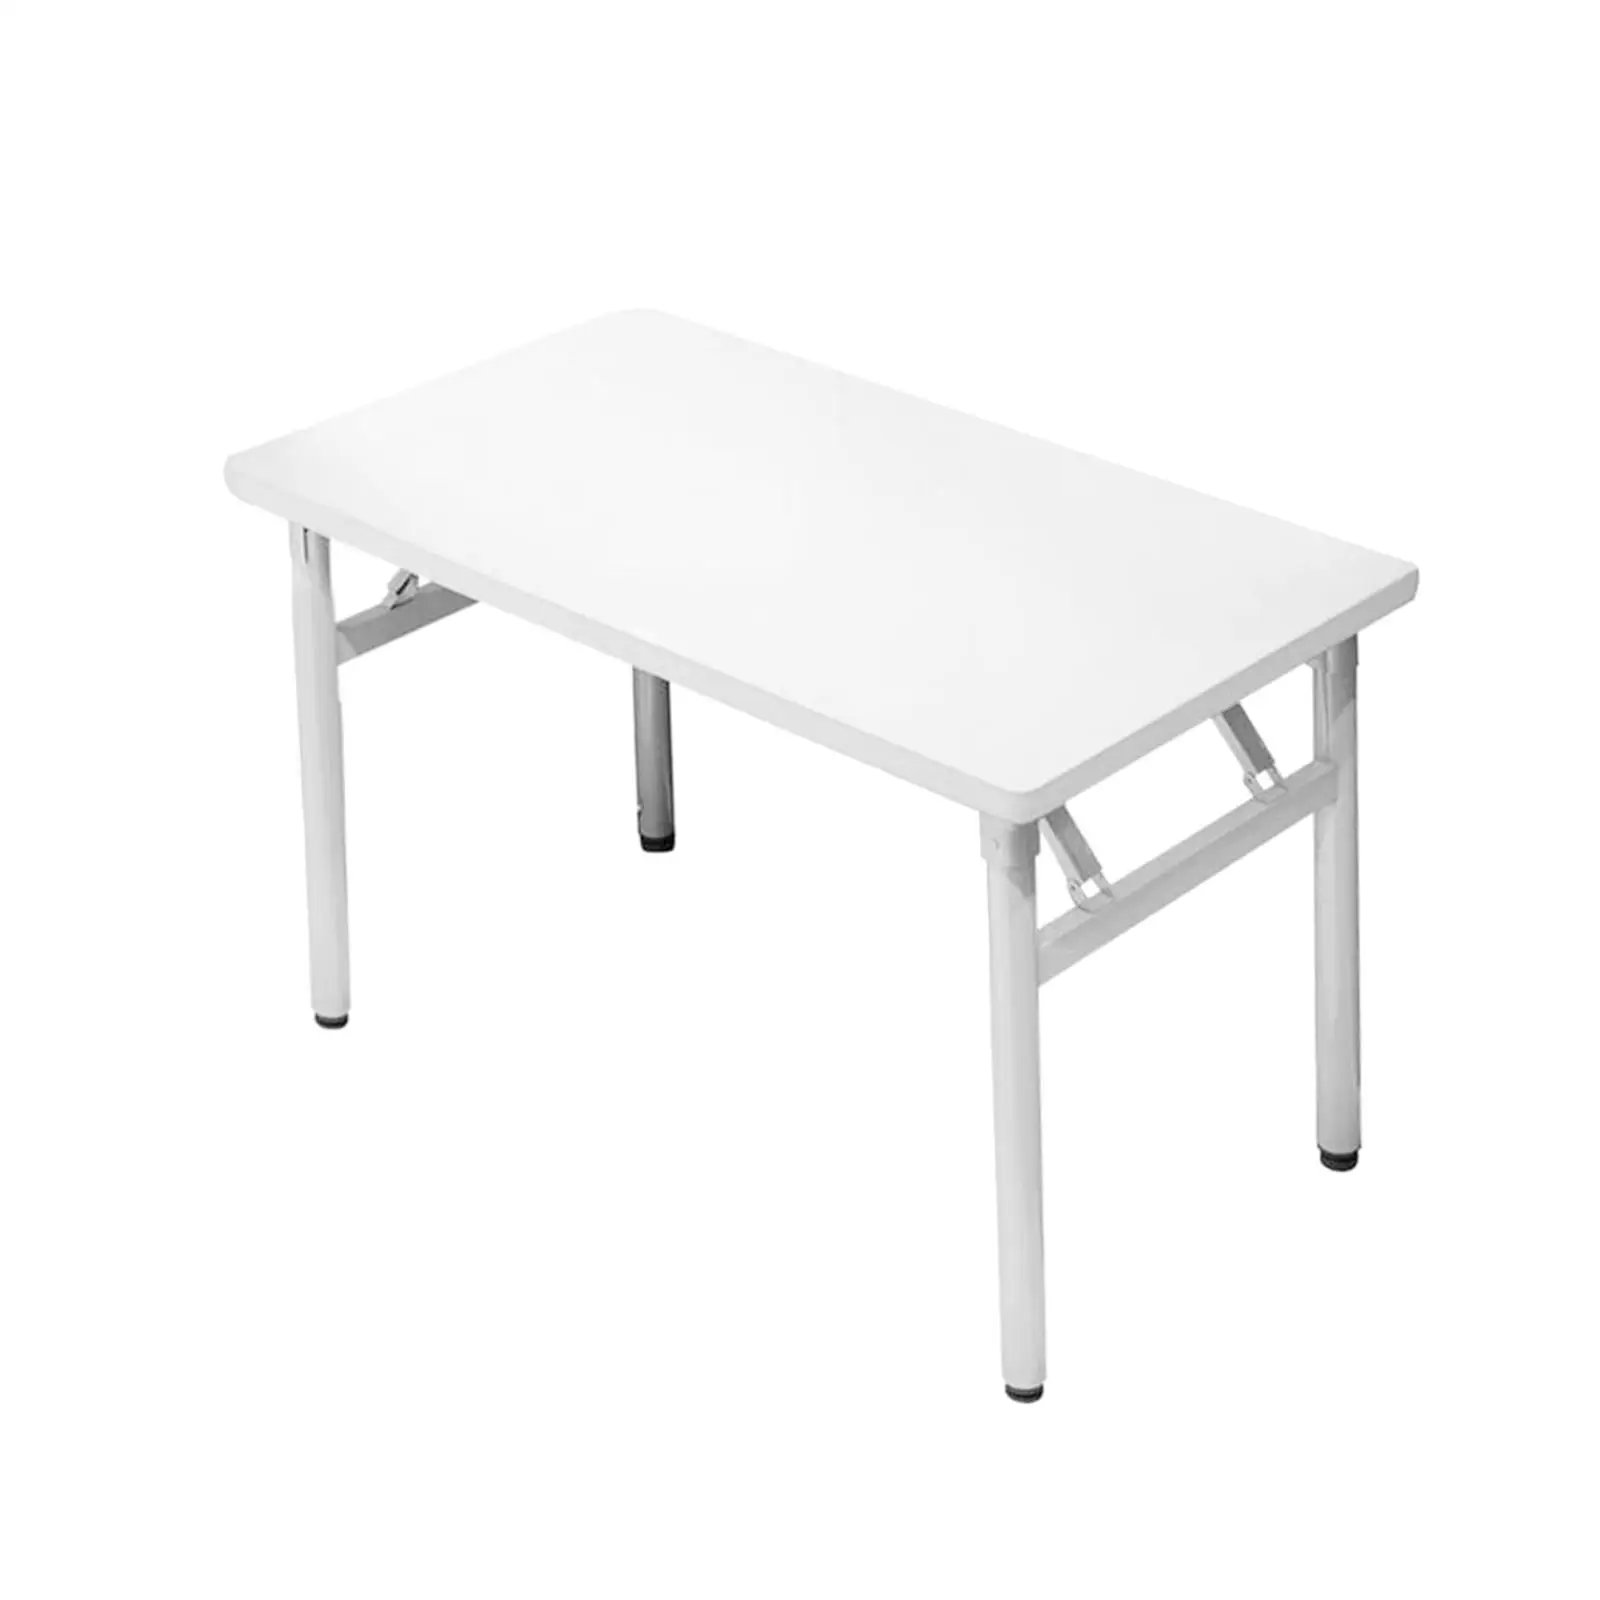 Heavy Duty Folding Snack Table Study Table Laptop Tea Coffee Picnic Table Desk Dining Table Camping Table for Picnic Indoor RV